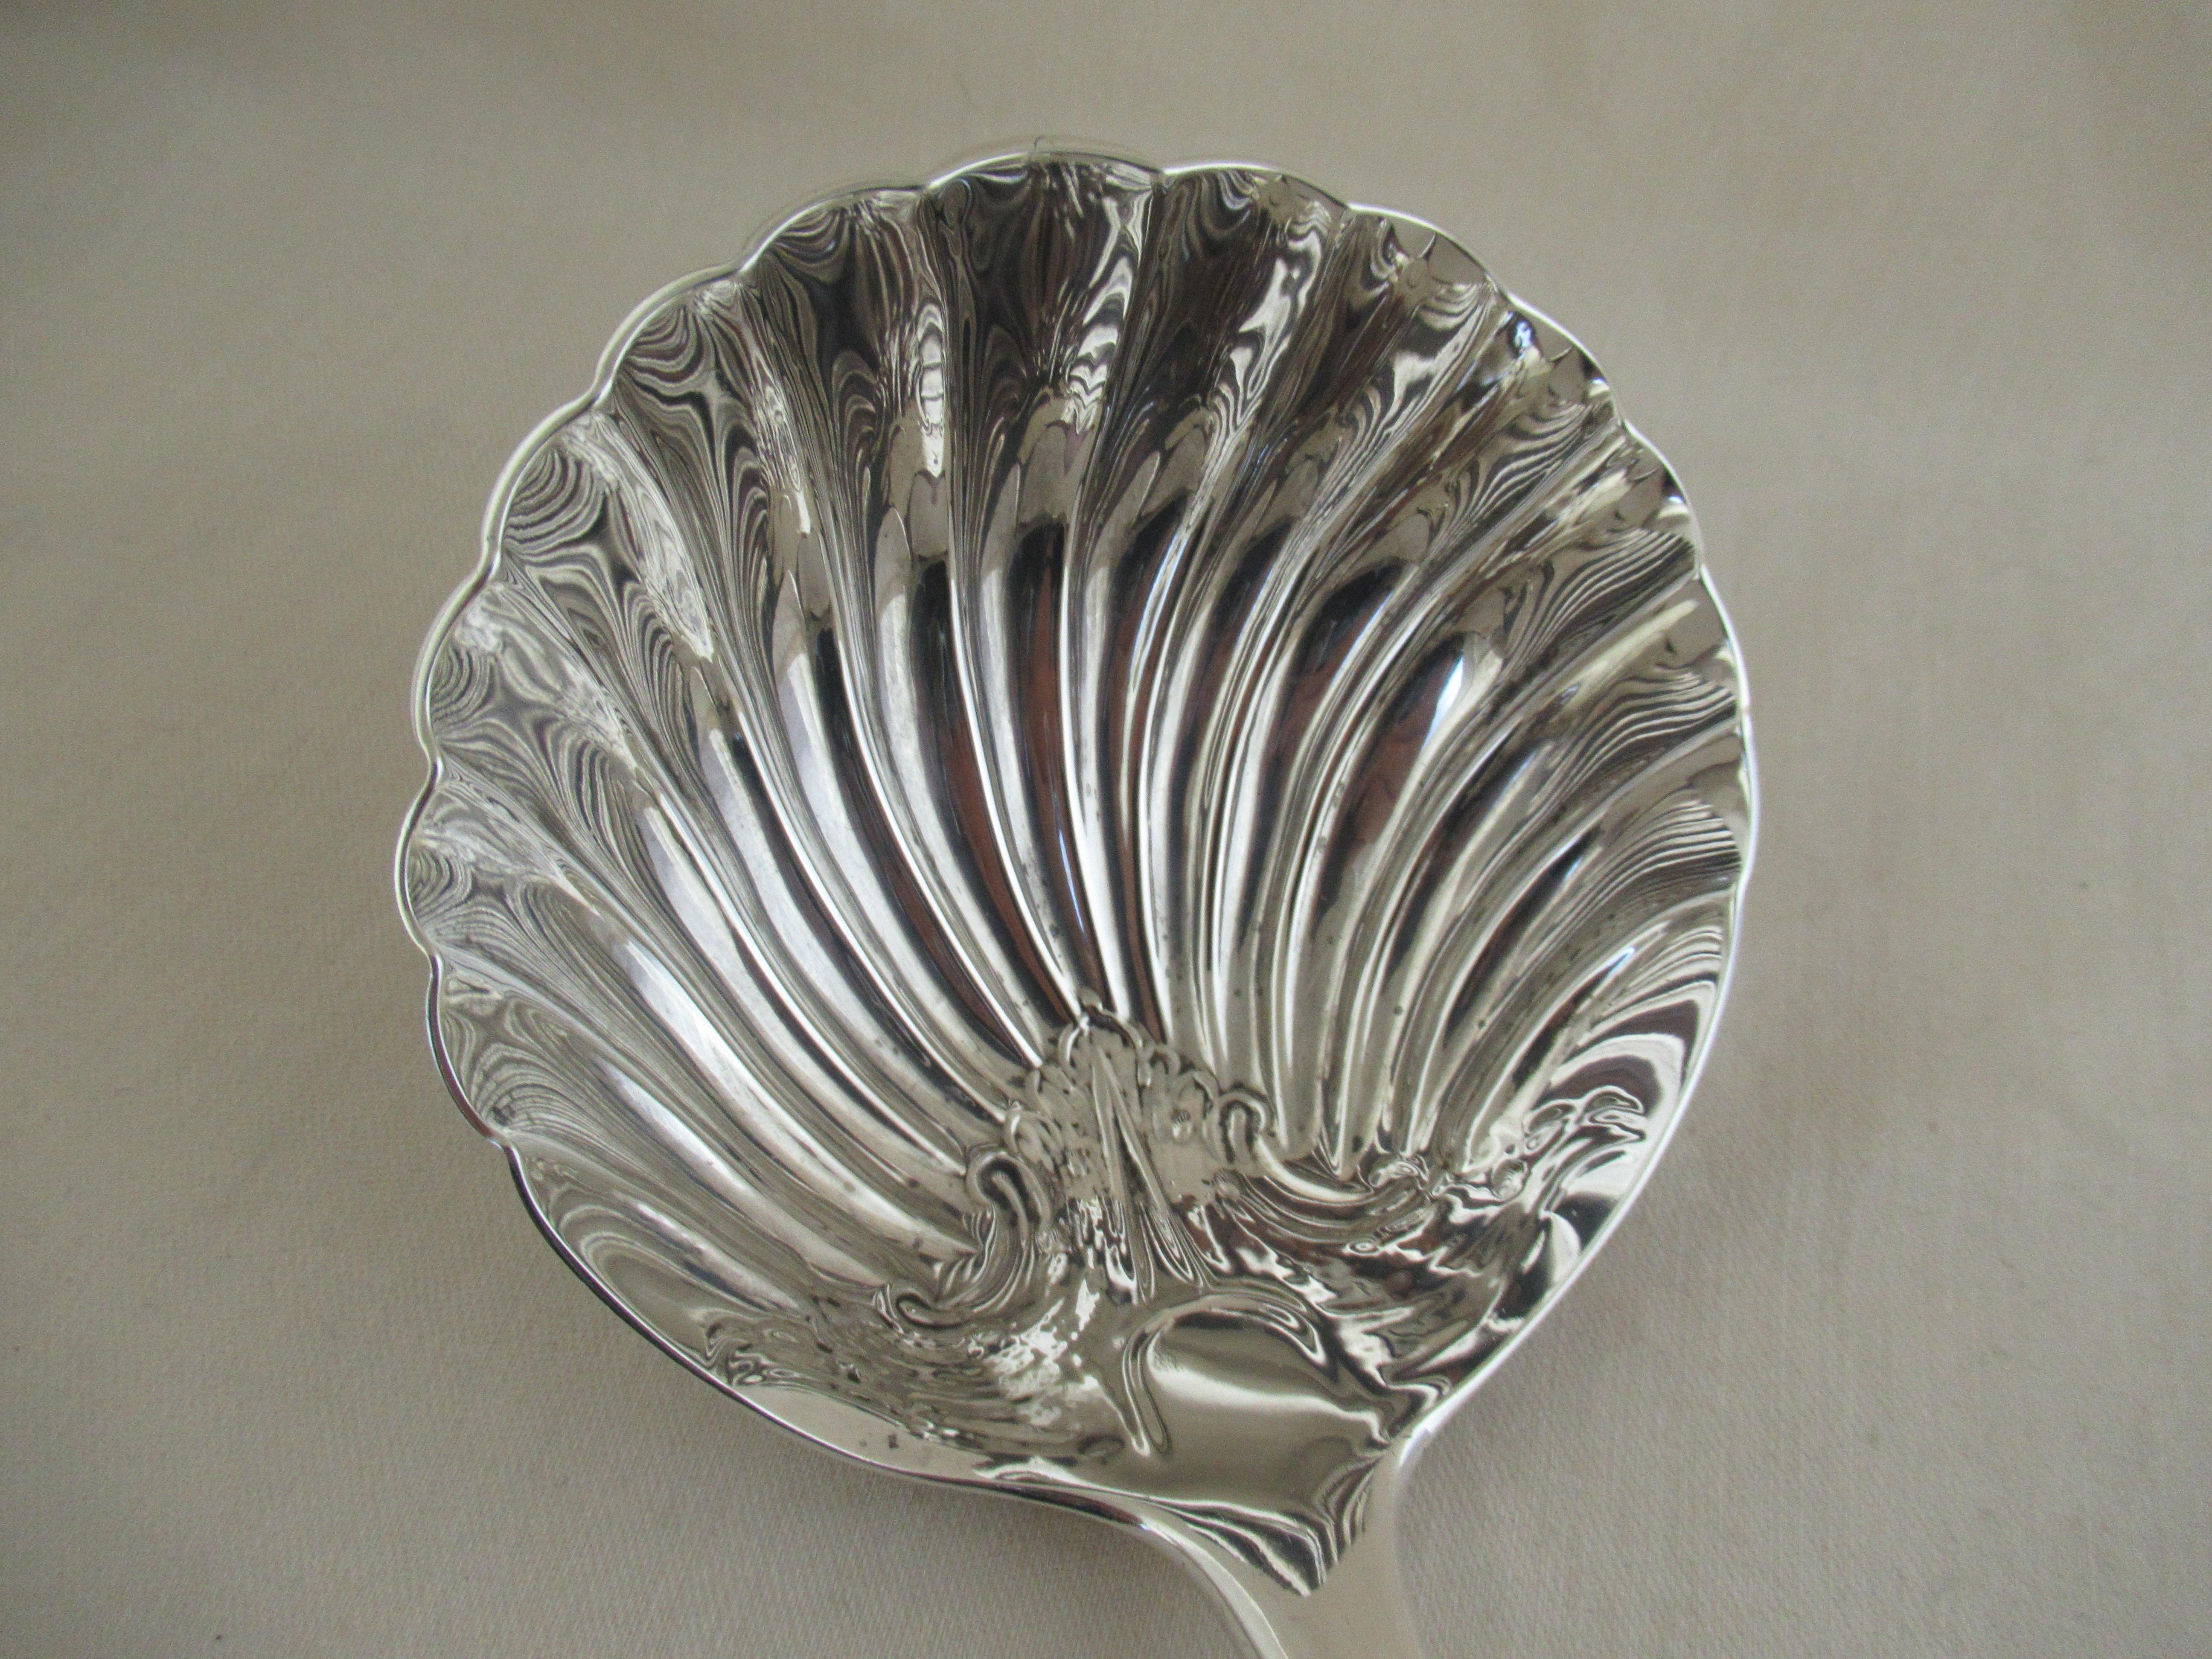 A superb sterling silver - Soup or Punch Ladle.
An ornate decorated shell pattern bowl - almost perfectly round - decorated on both sides.
The Old English shaped stem is beautifully engraved with leaves and a flower.
At the terminal, a shaped